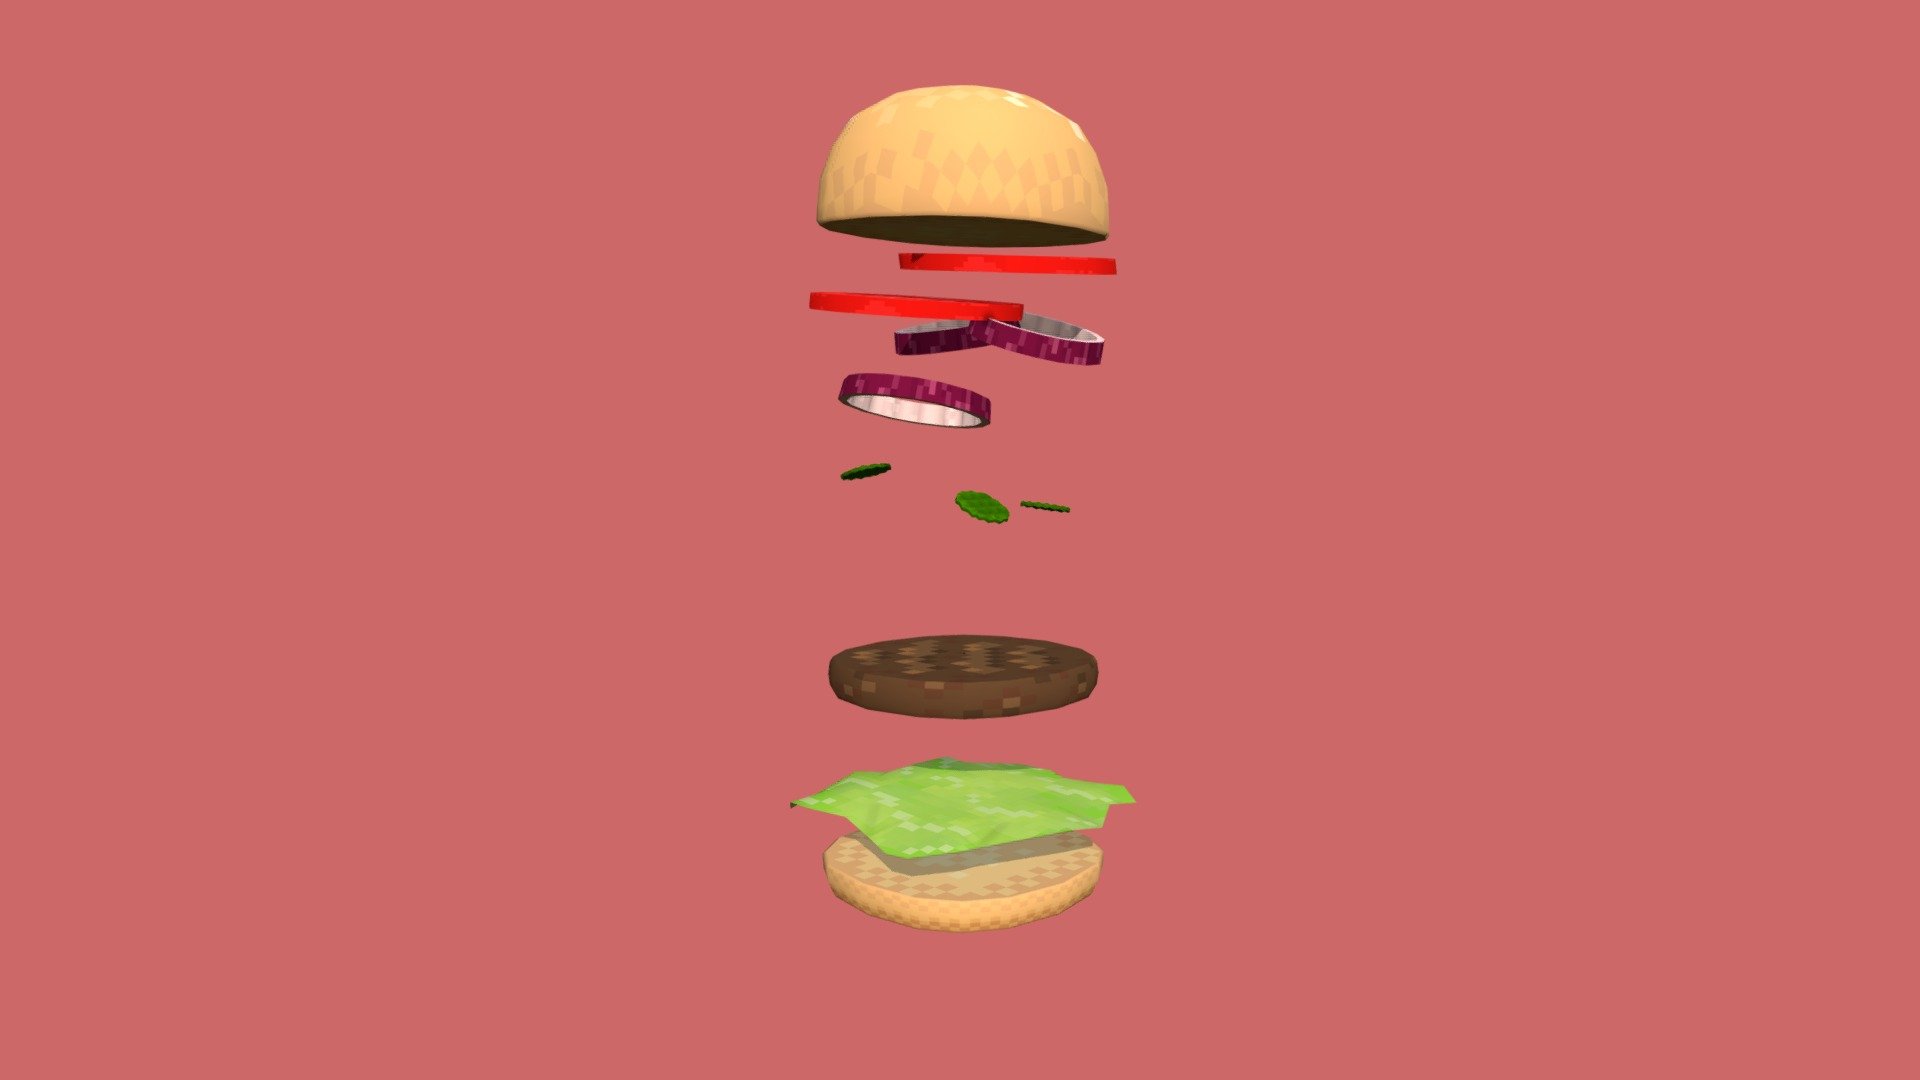 This is my entry for Sully's Pixel Challenge. 
Smol animated pixel burger. I don't know if animated models could be submited or no. Hope they are haha.
Anyways pretty fun model to make and my first time trying pixel textures on 3D models. Was definitely a little challenge 3d model